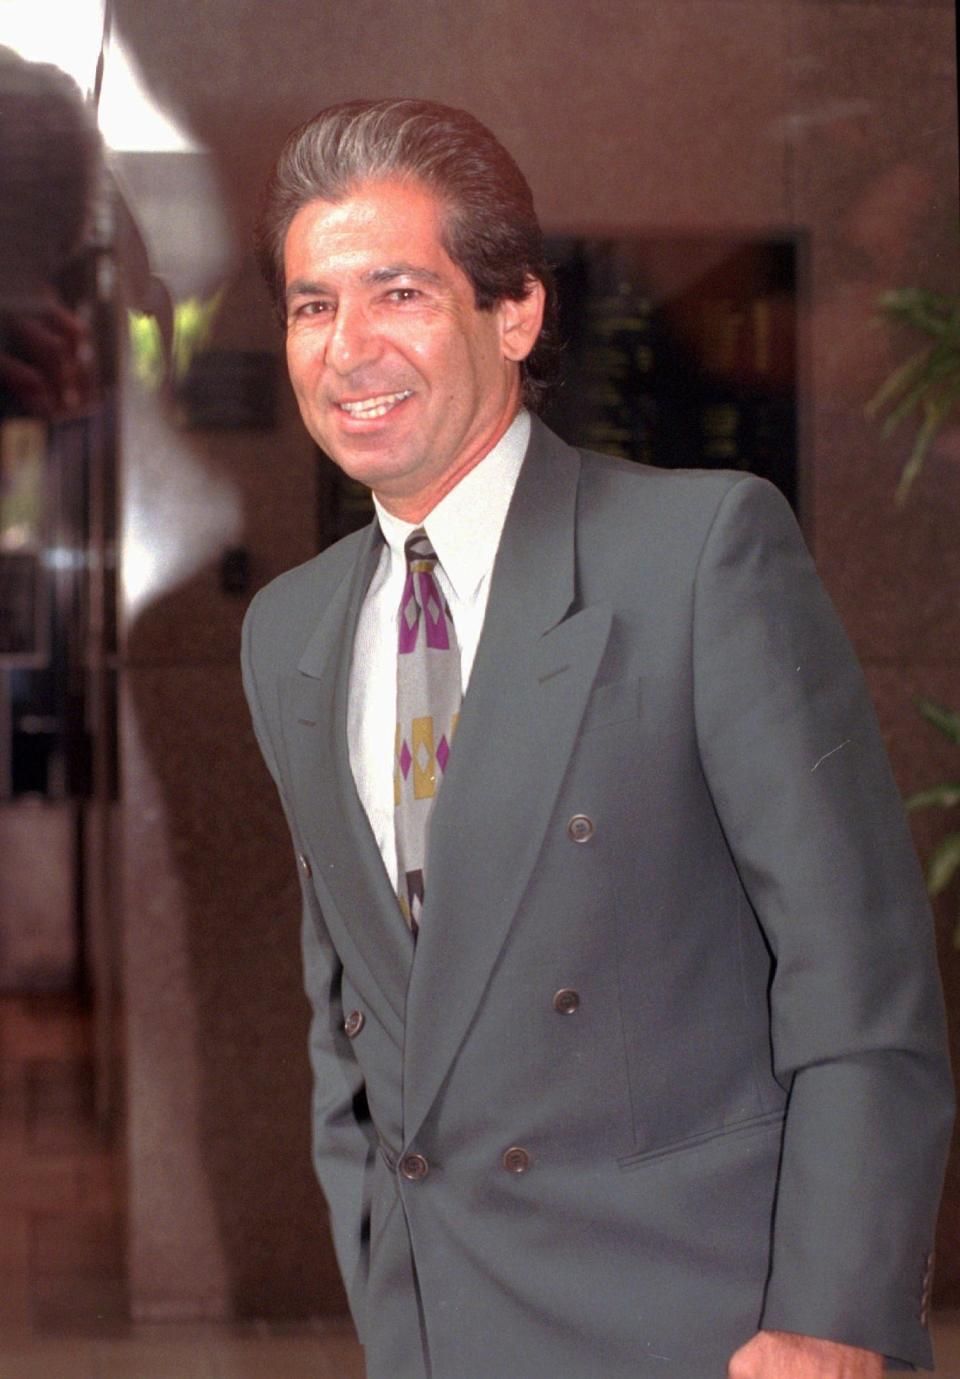 Robert Kardashian, a defense attorney who became a fixture during the O.J. Simpson murder trial, died in 2003.